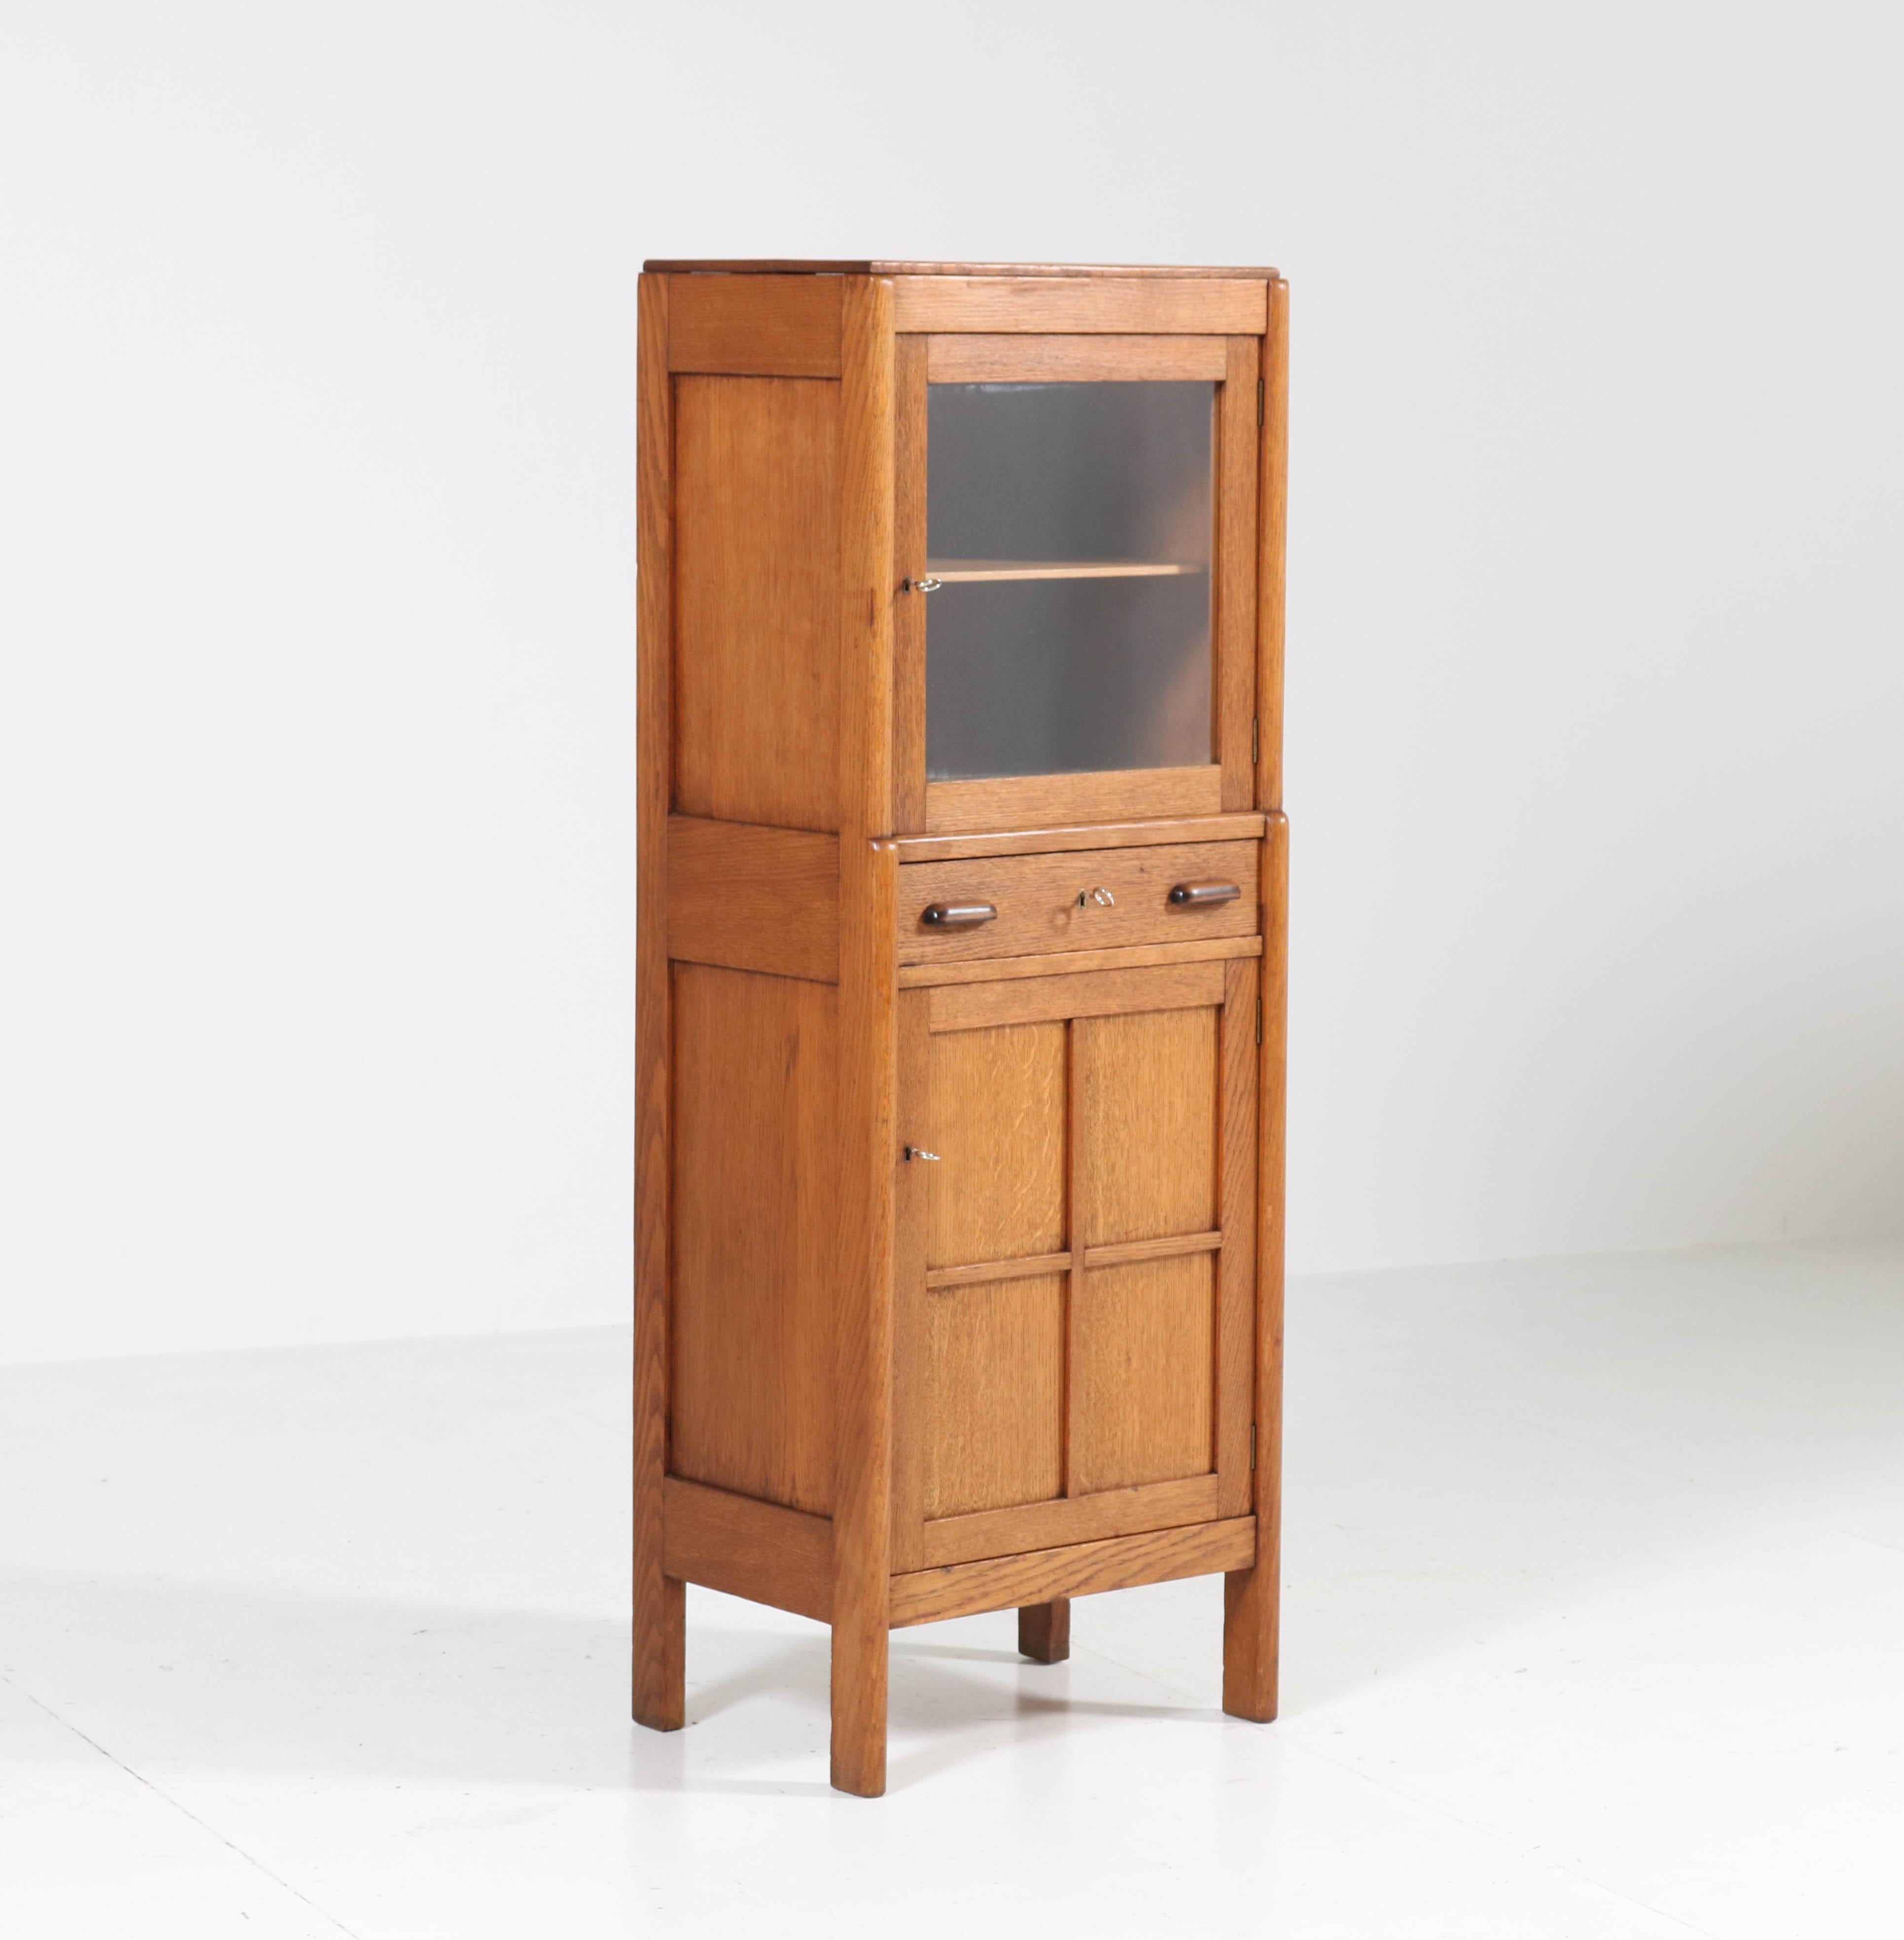 Wonderful and rare Art Deco Amsterdam School cabinet.
Striking Dutch design from the twenties.
Solid oak with solid ebony Macassar knobs on the drawer.
Three locks and keys in good working order.
In good original condition with minor wear